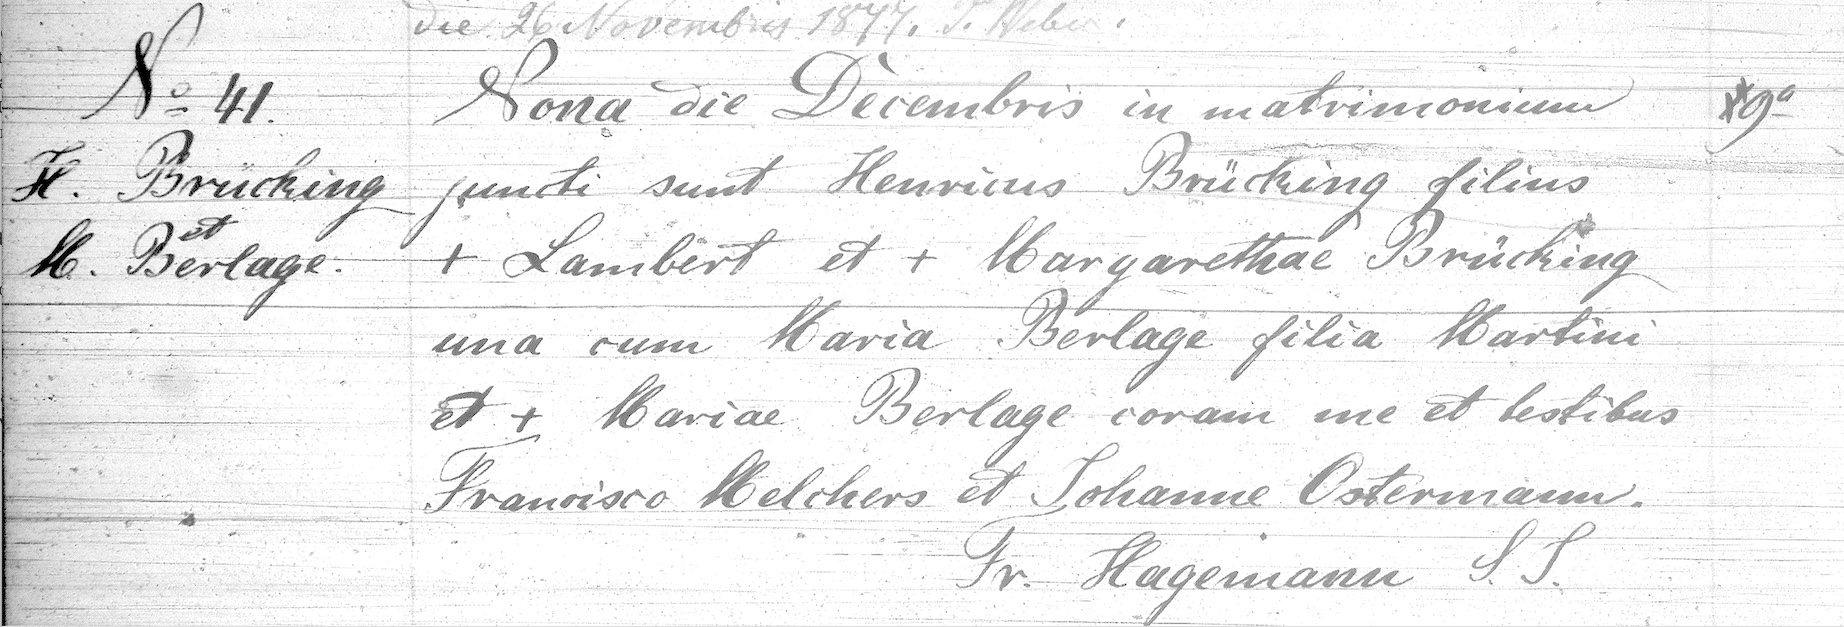 1877 Henry and Mary Marriage Document close